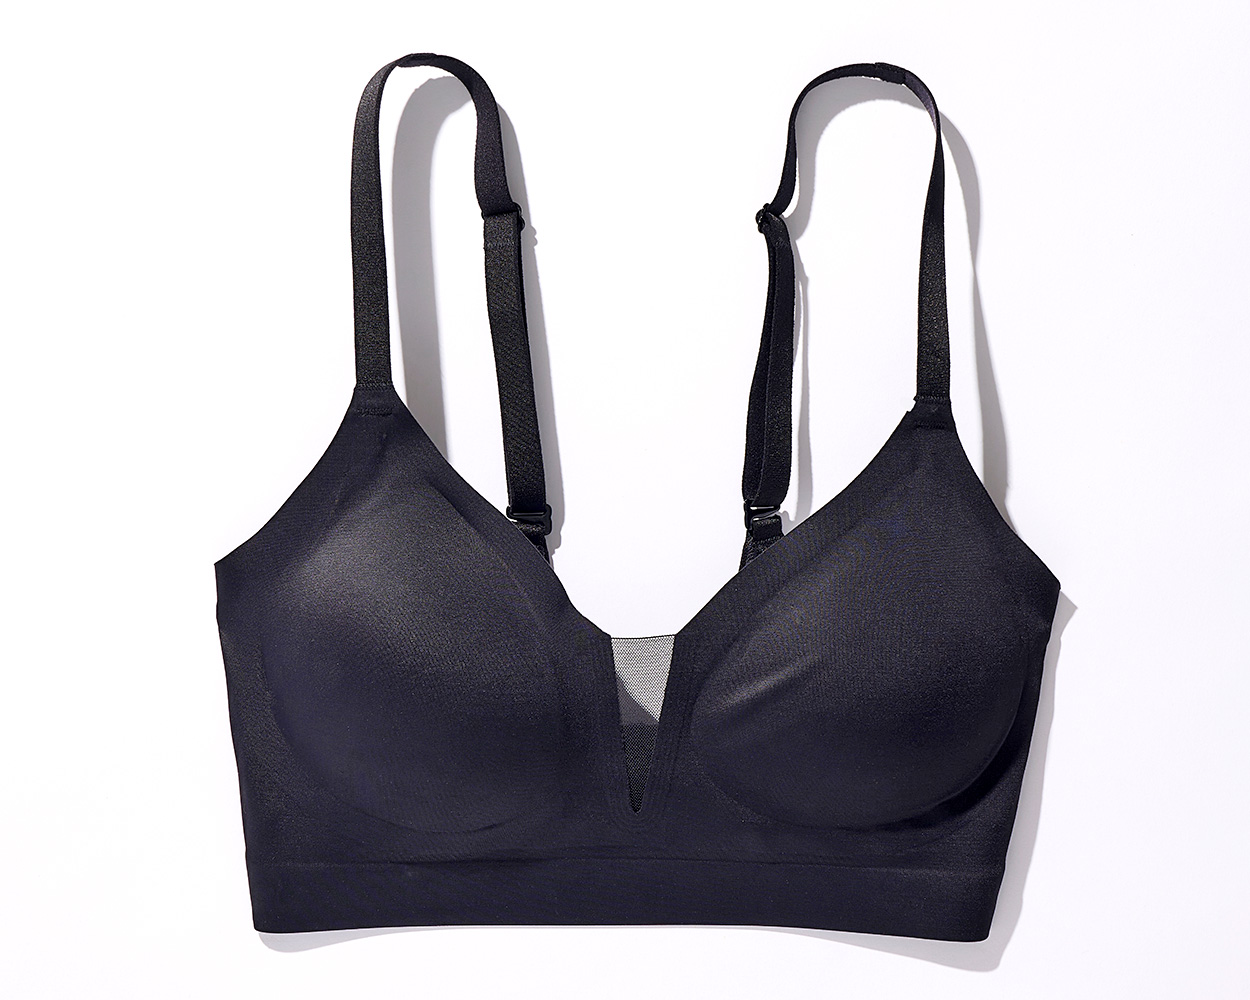 Soma<sup class=st-superscript>®</sup> laydown of a black bralette with a sheer mesh center detail.